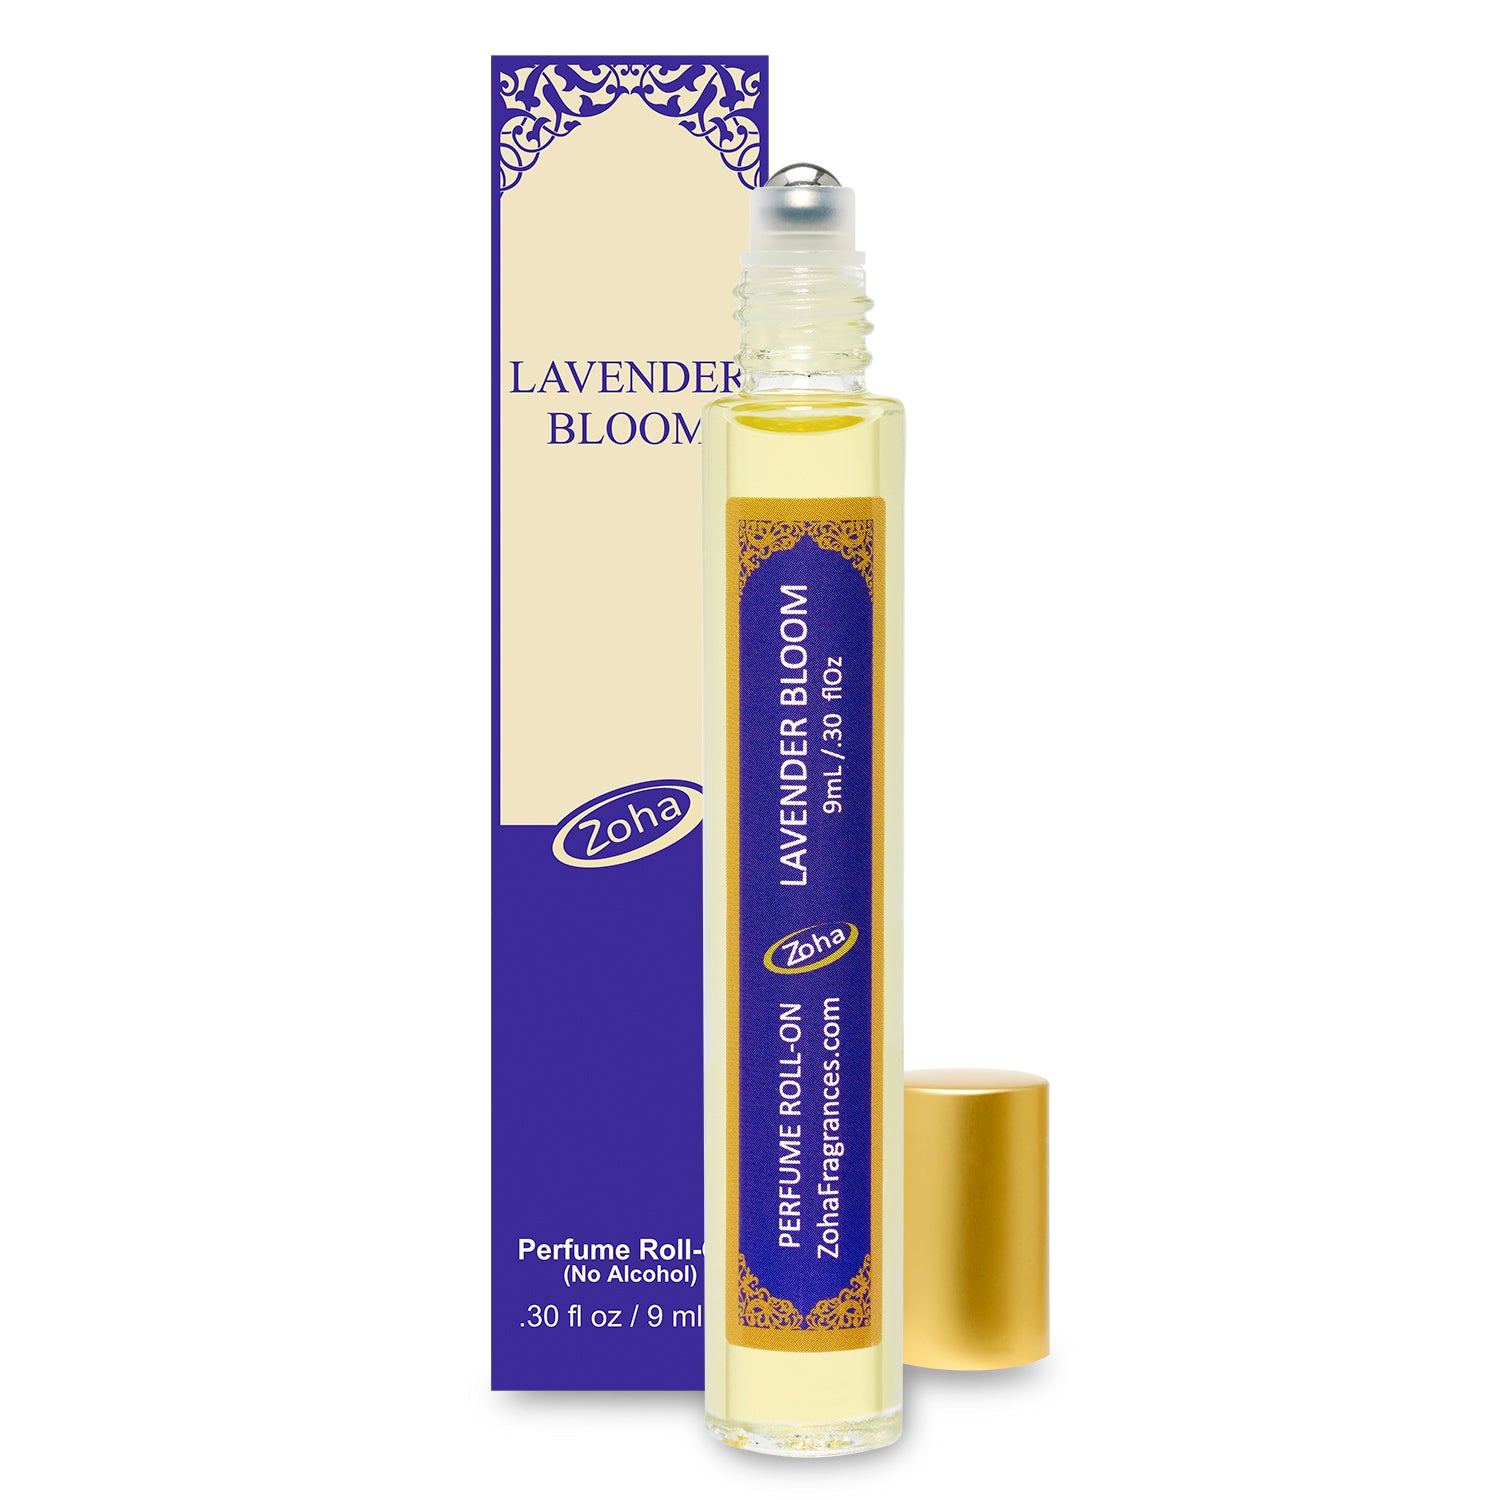 Lavender Bloom Roll On Perfume for Women and Men